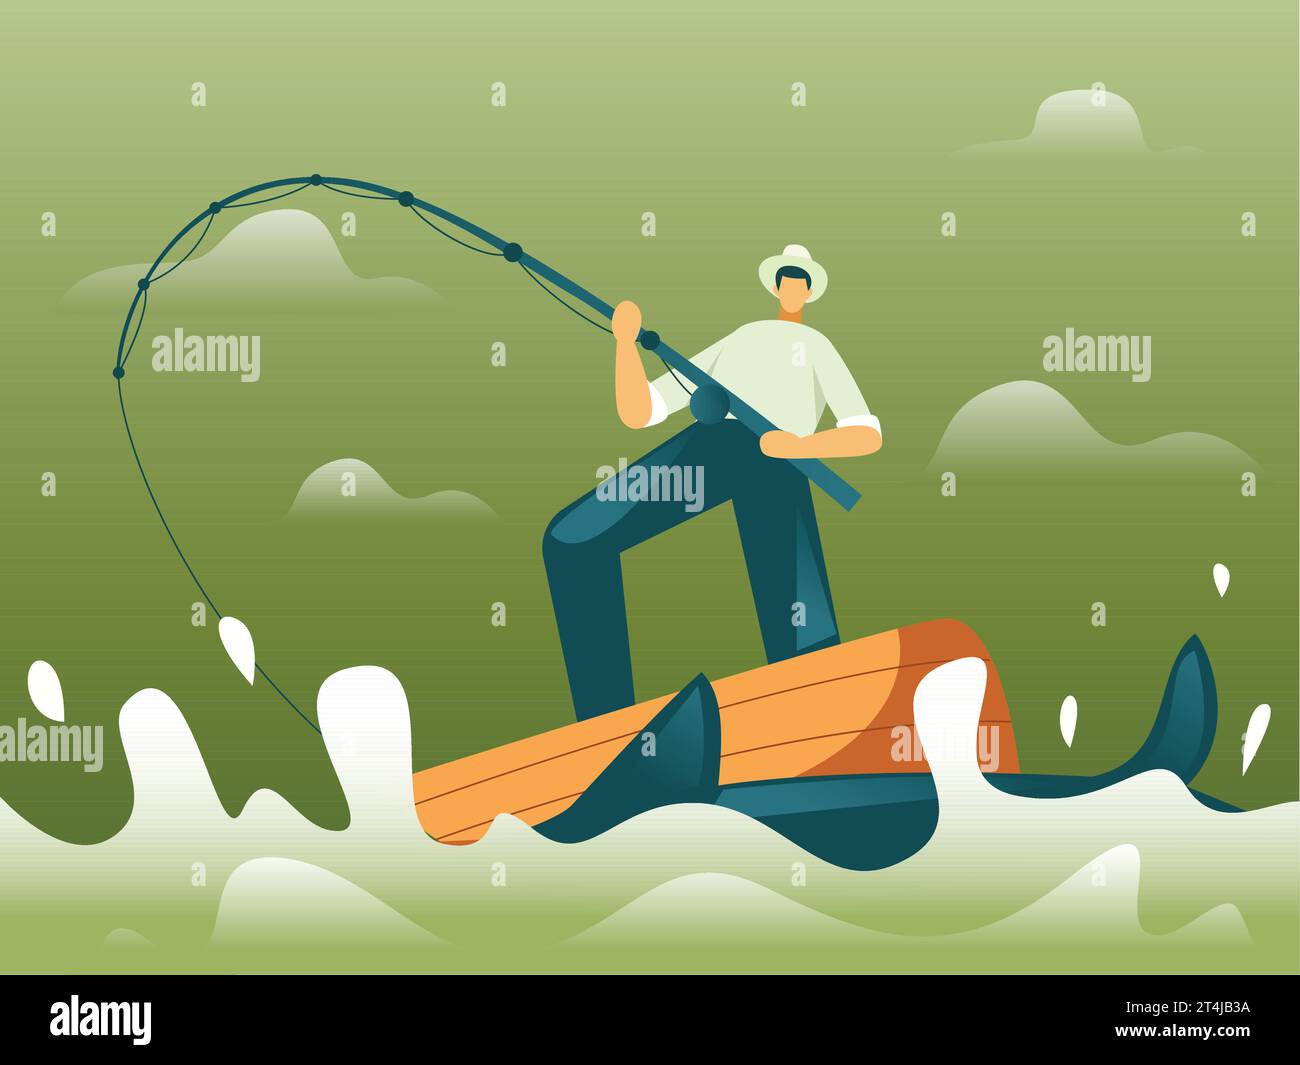 Fisherman group Stock Vector Images - Alamy